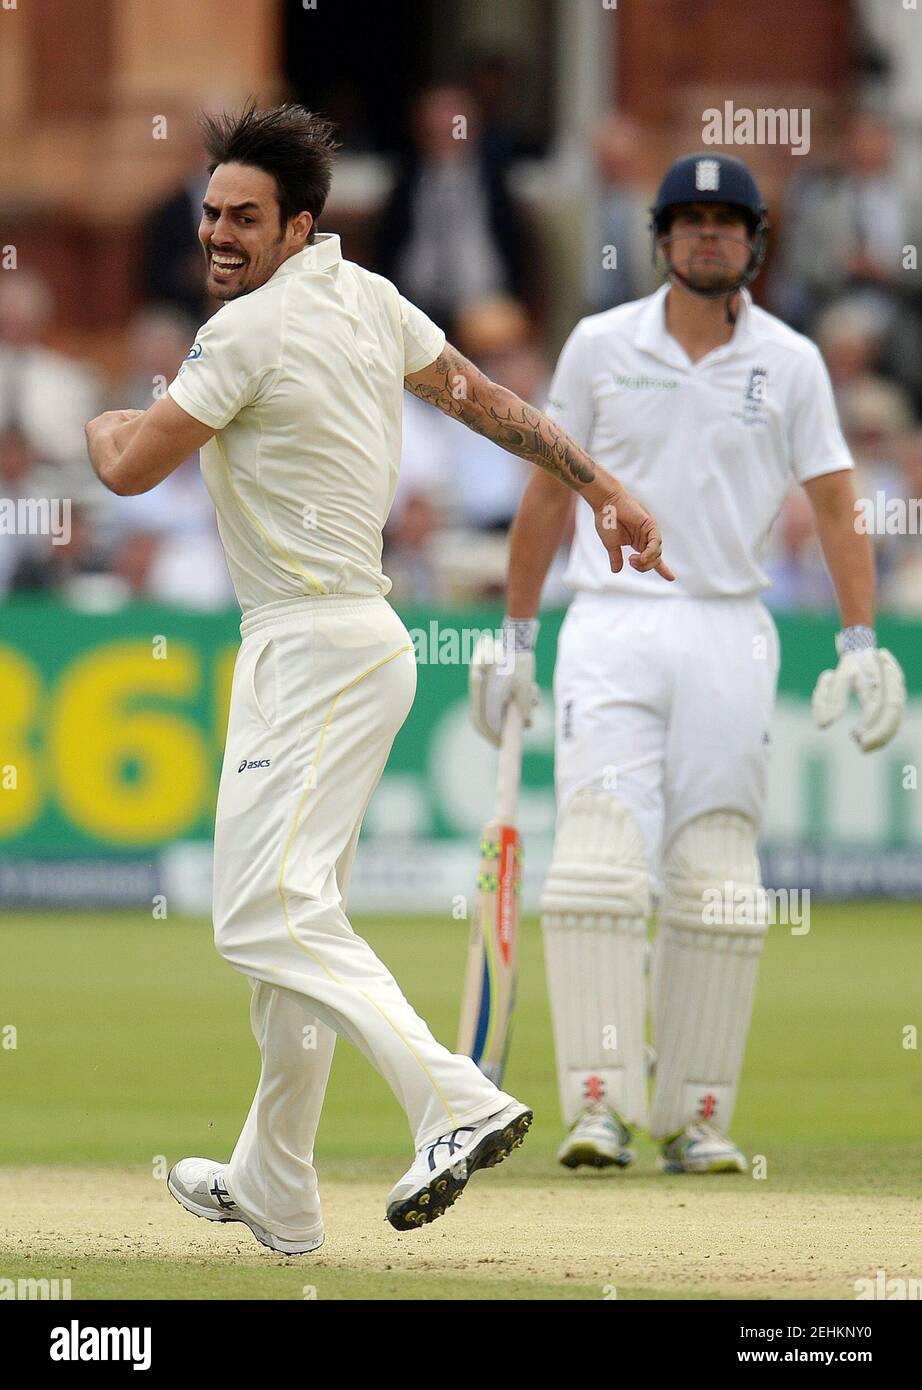 Cricket - England v Australia - Investec Ashes Test Series Second Test - Lord?s - 17/7/15 Australia's Mitchell Johnson celebrates after dismissing England's Joe Root (not pictured) Reuters / Philip Brown Livepic Stock Photo